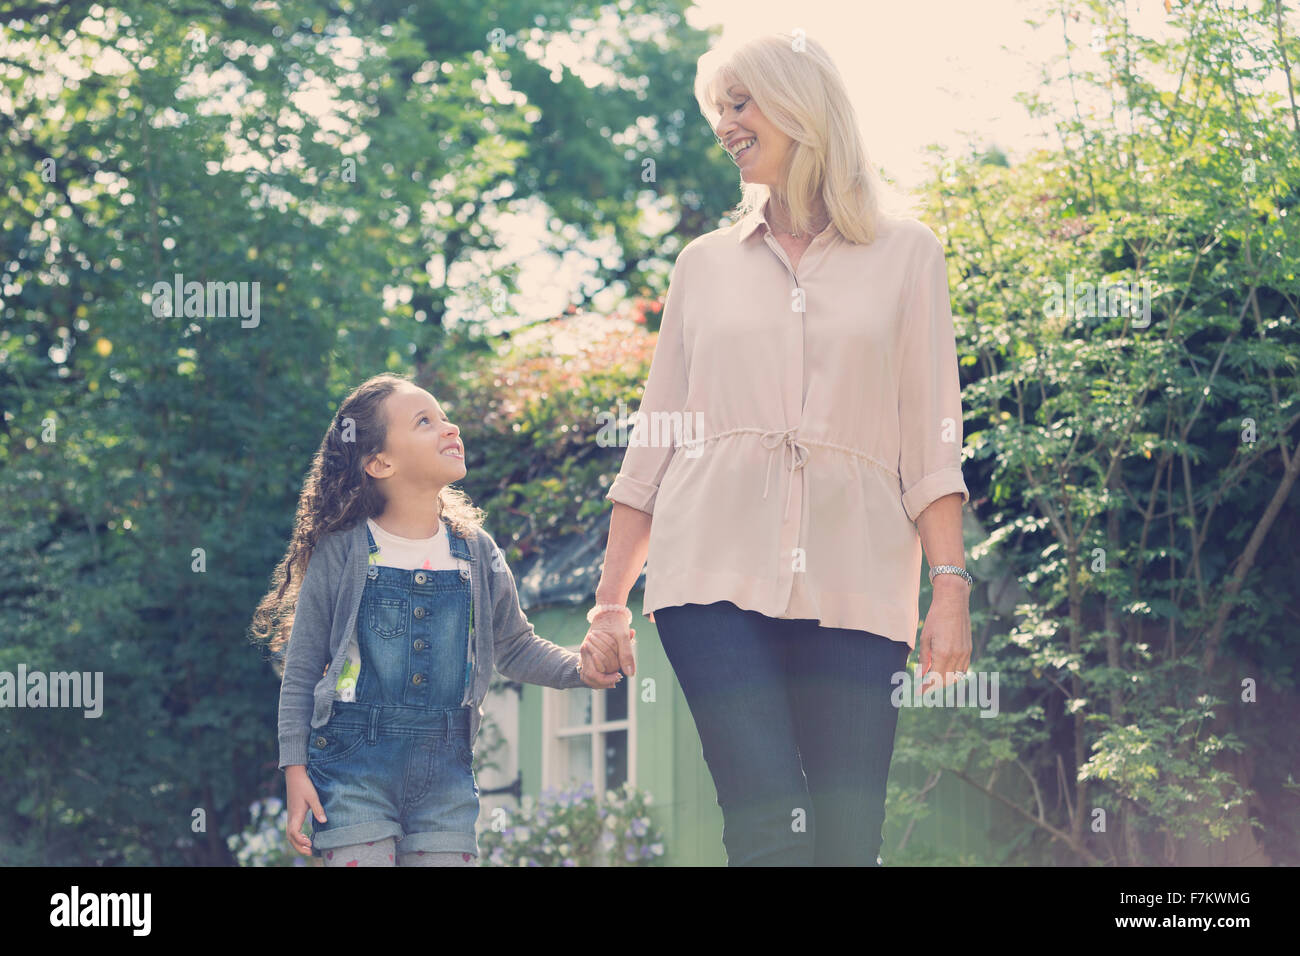 Grandmother and granddaughter holding hands and walking in garden Stock Photo